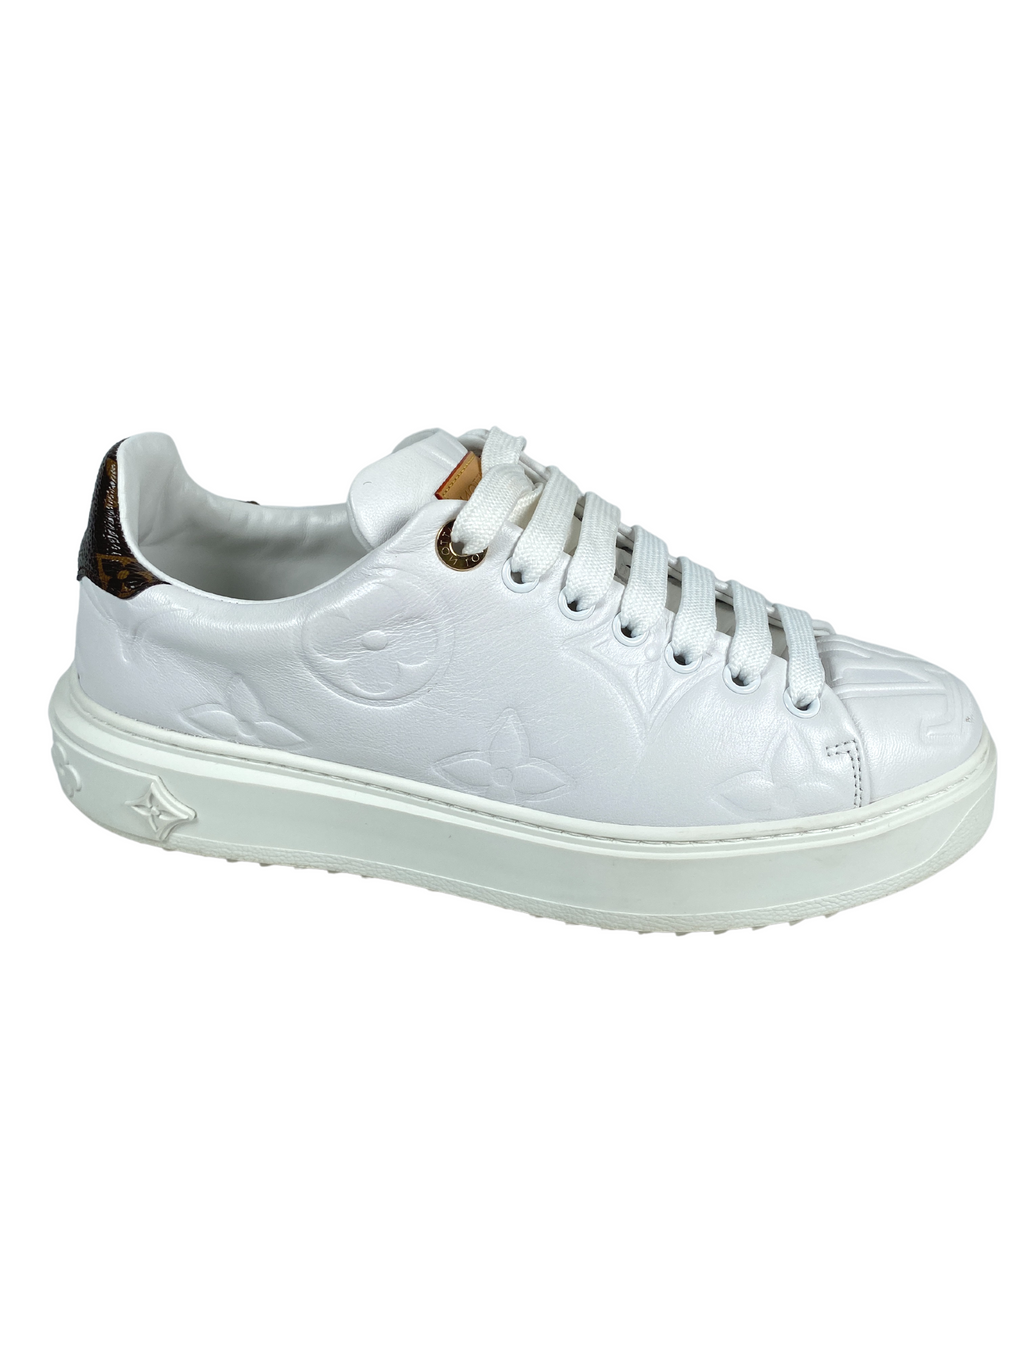 LOUIS VUITTON - TIME OUT SNEAKER IN WHITE - SZ 38